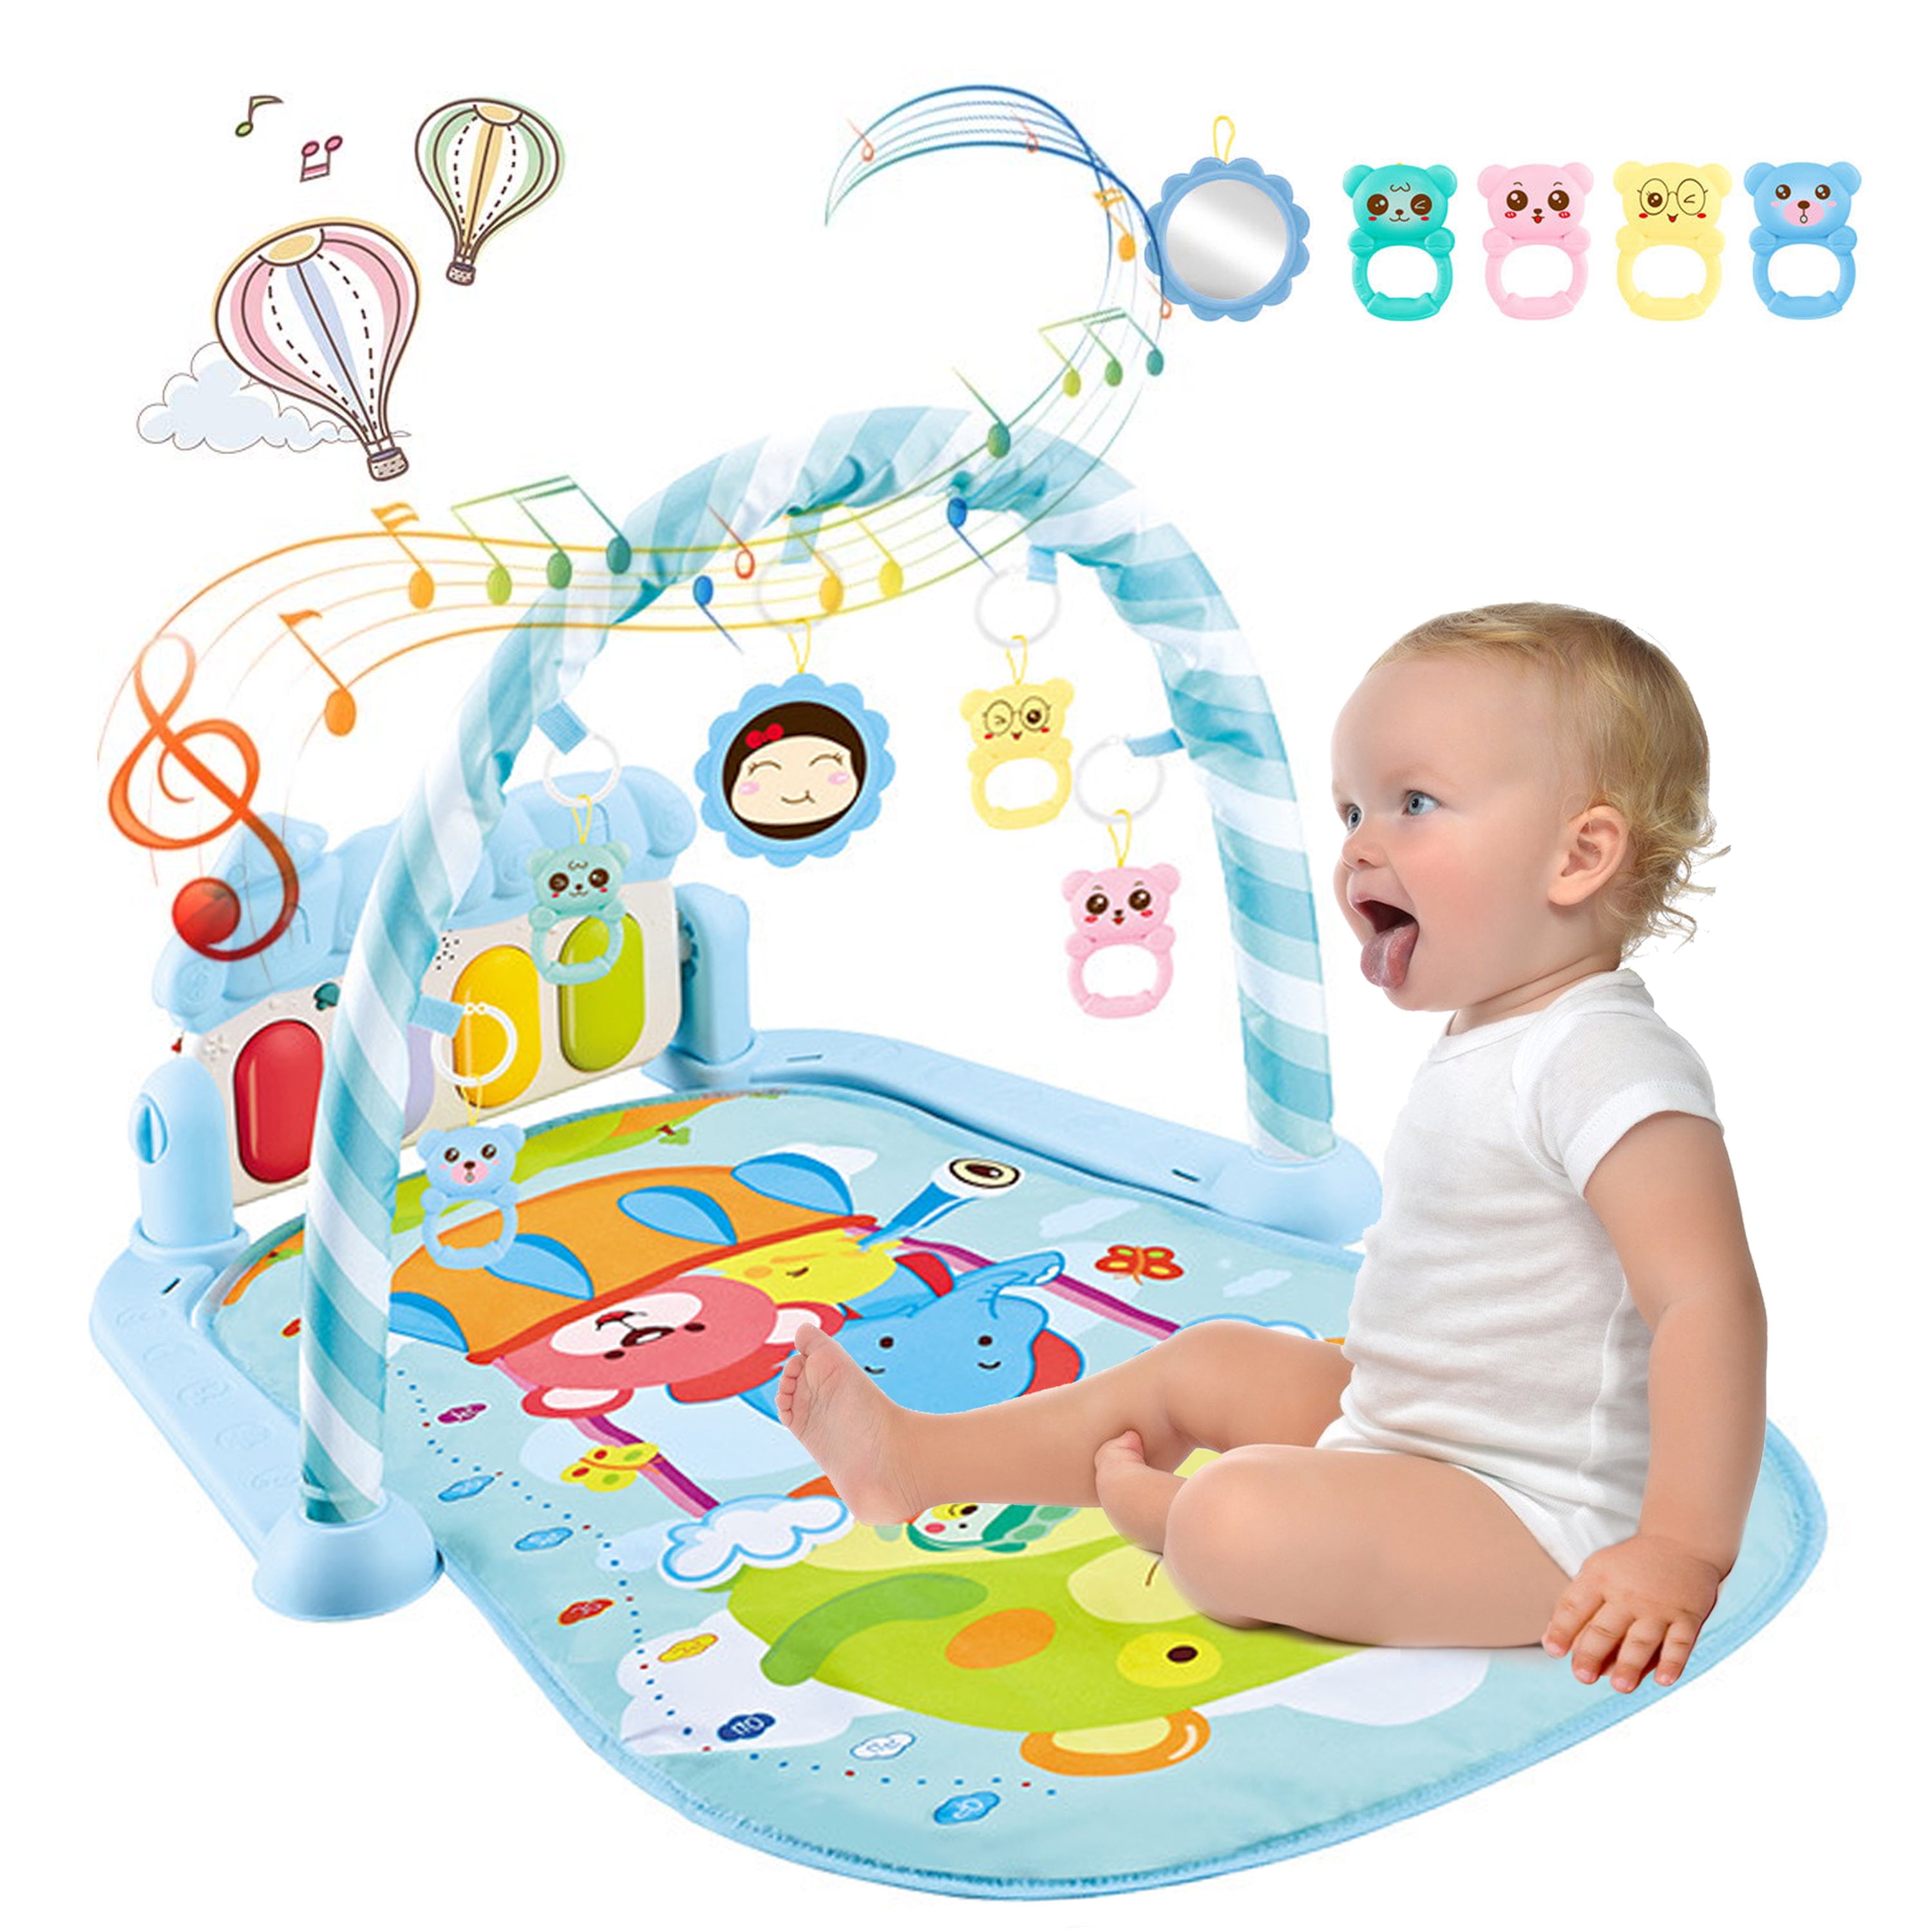 TEAYINGDE Baby Gym Play Mat 3 in 1 Fitness Rack with Music and Lights Fun  Piano Baby Activity Center,Pink